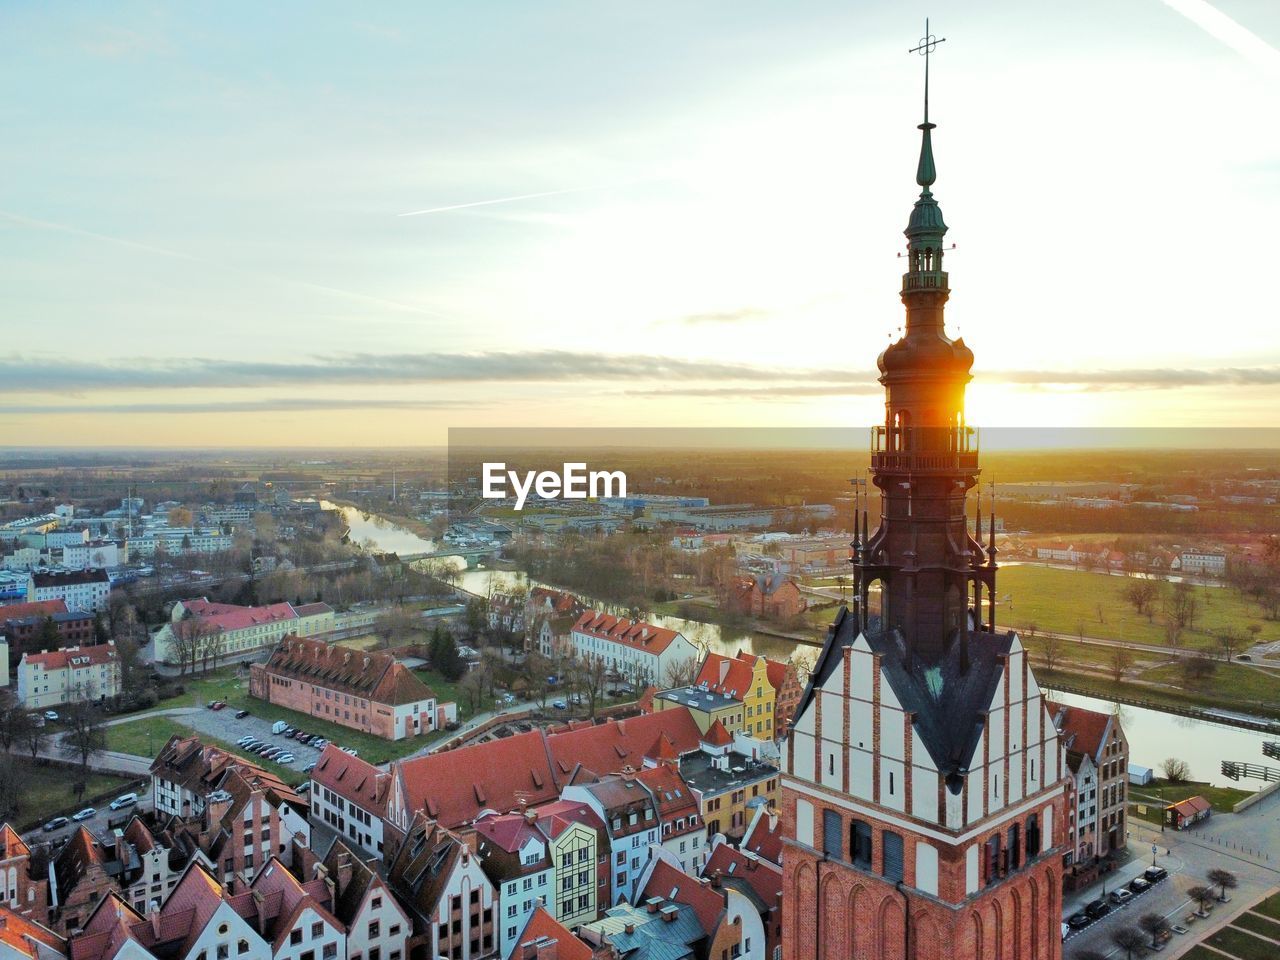 Drone shot of an old town in elblag at sunset